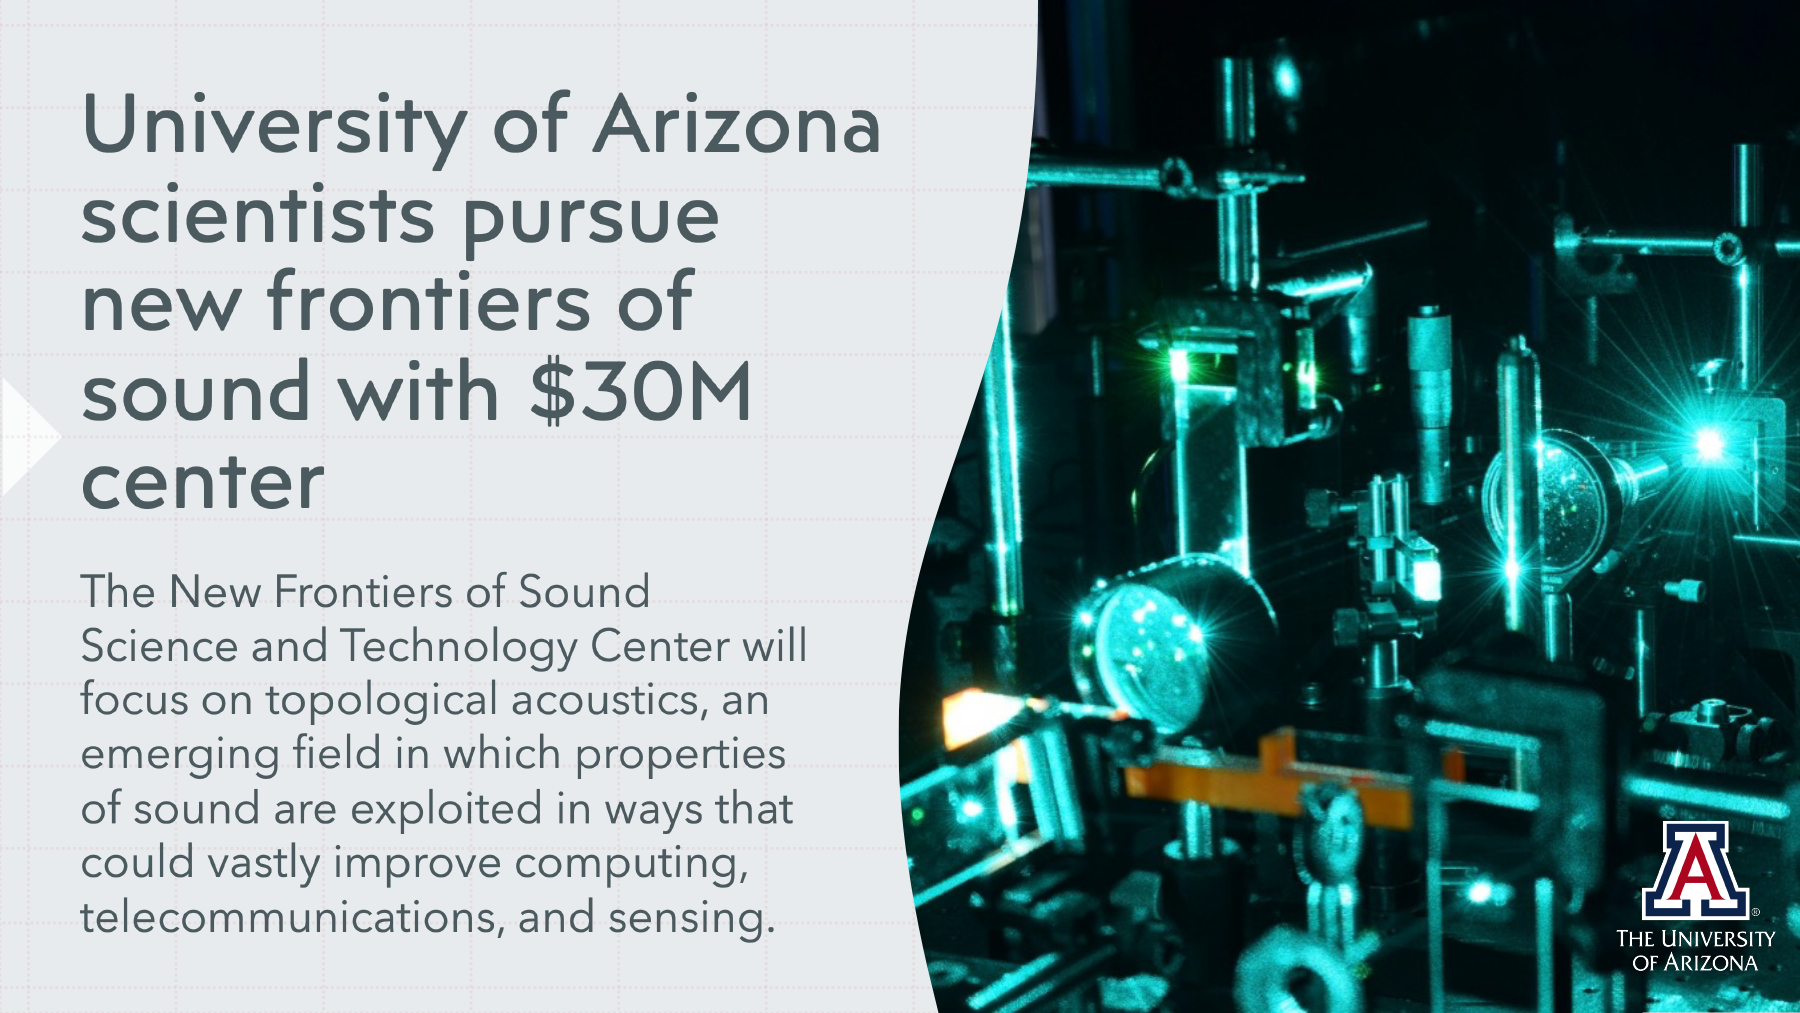 University of Arizona scientists pursue new frontiers of sound with $30M center